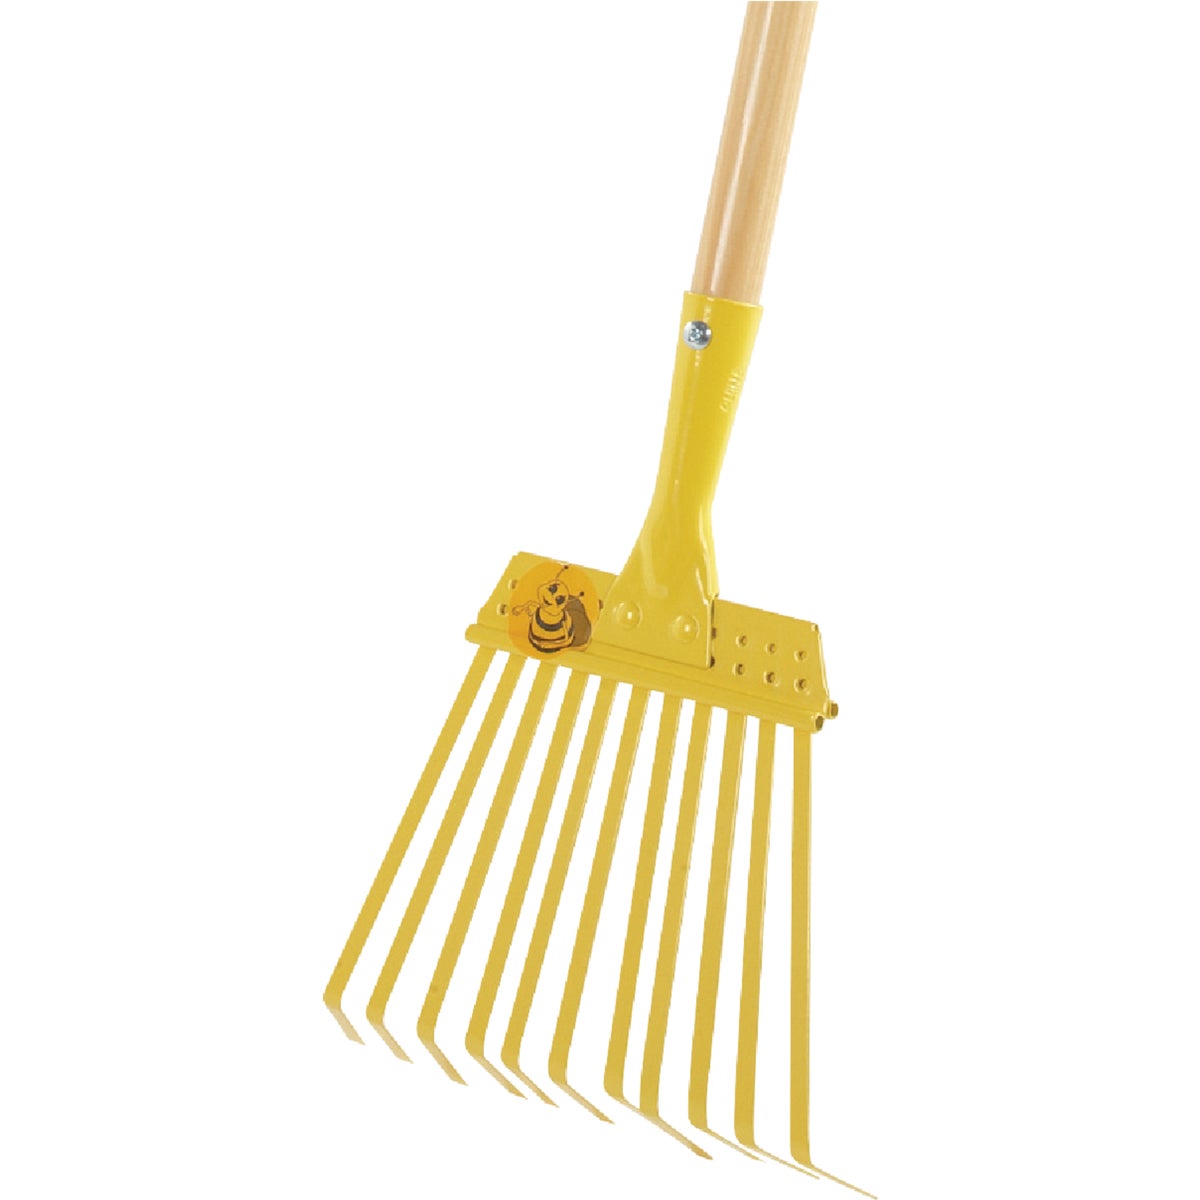 Item 706531, High-quality childrens leaf rake is a scaled down replica of full sized 